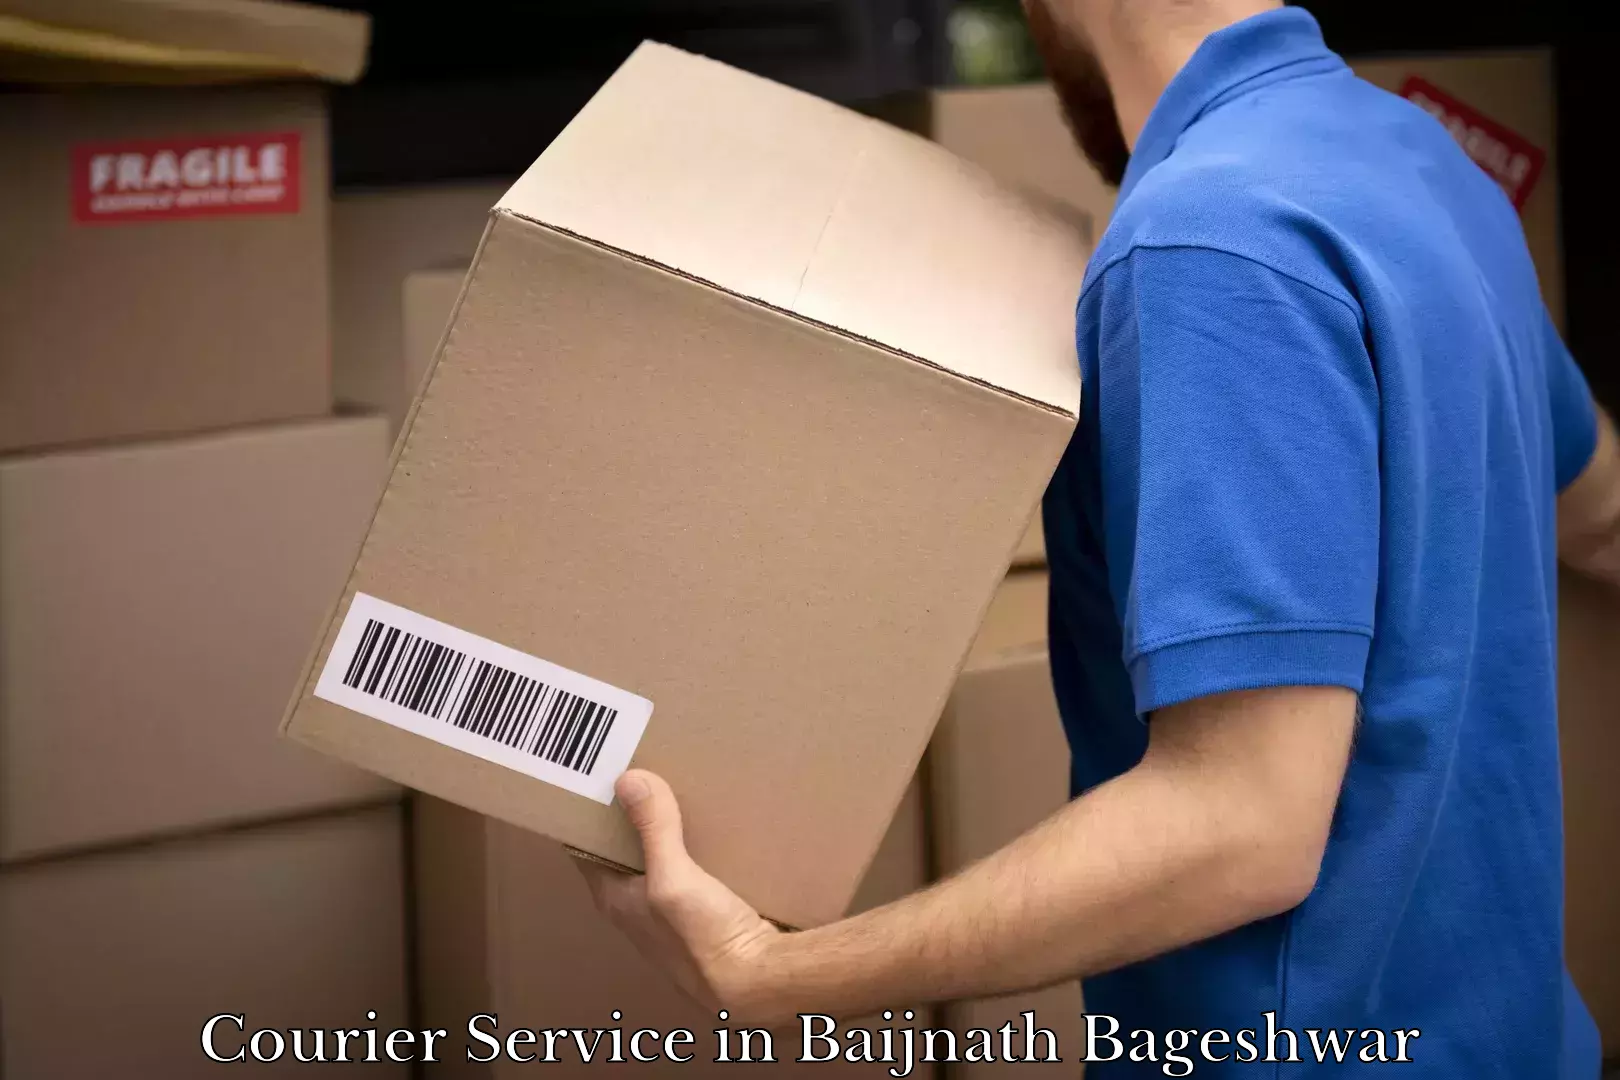 Wholesale parcel delivery in Baijnath Bageshwar